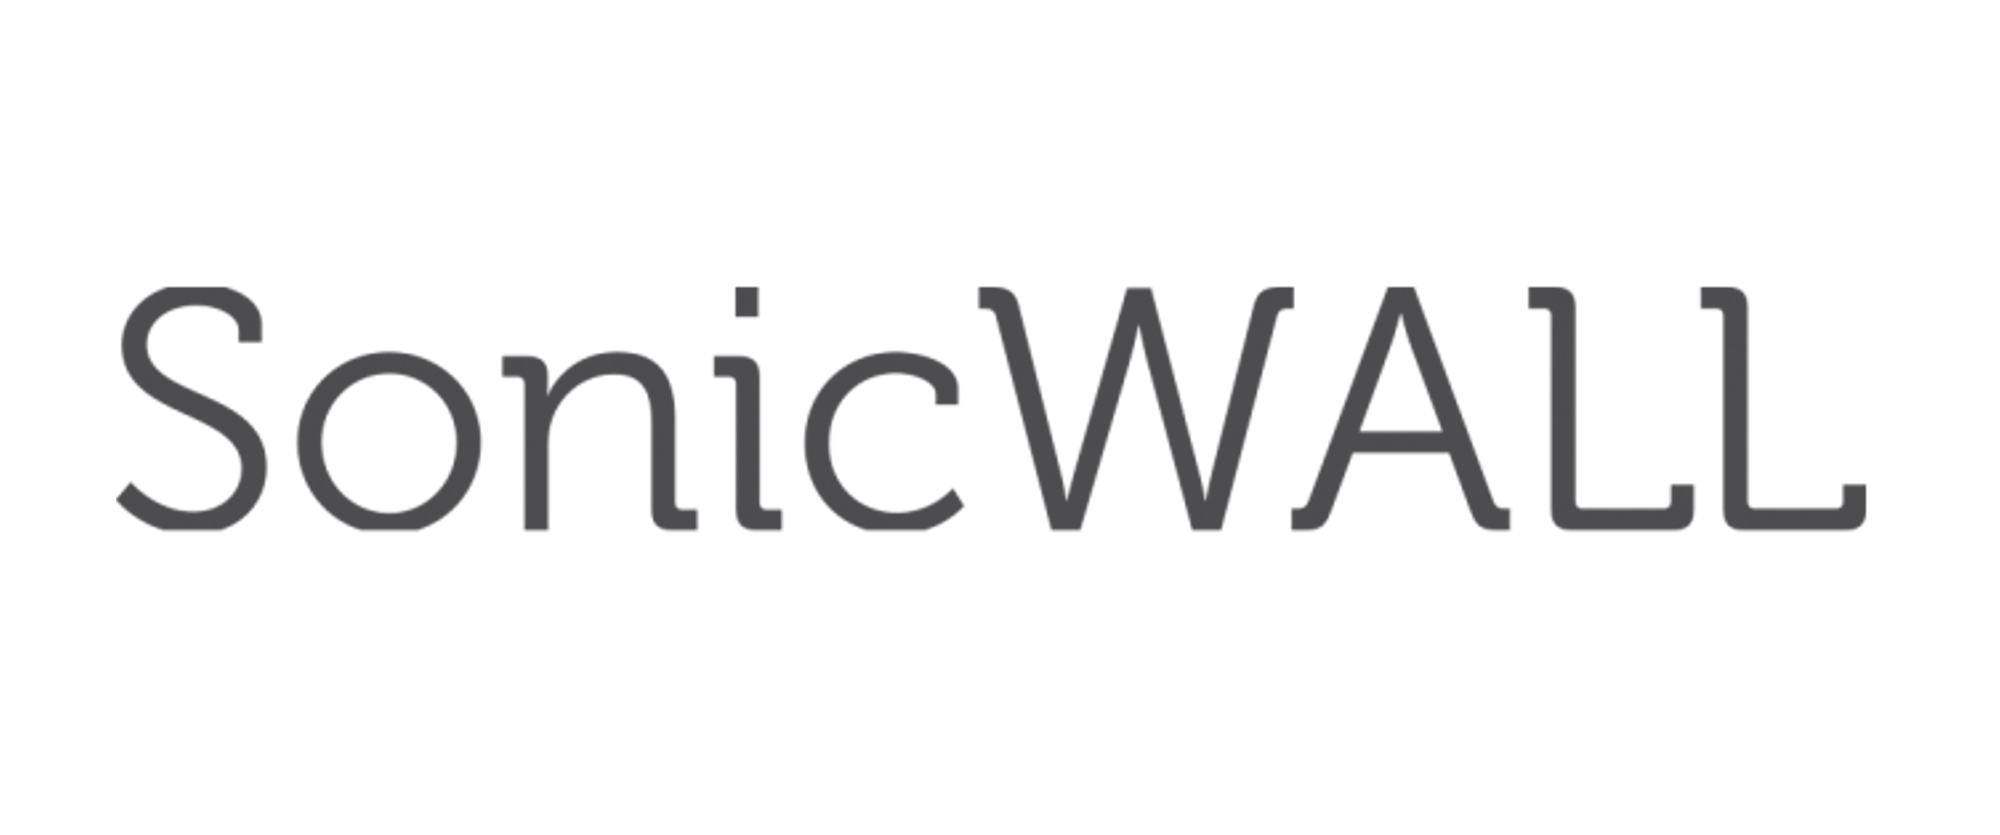 sonicwall-logo.png